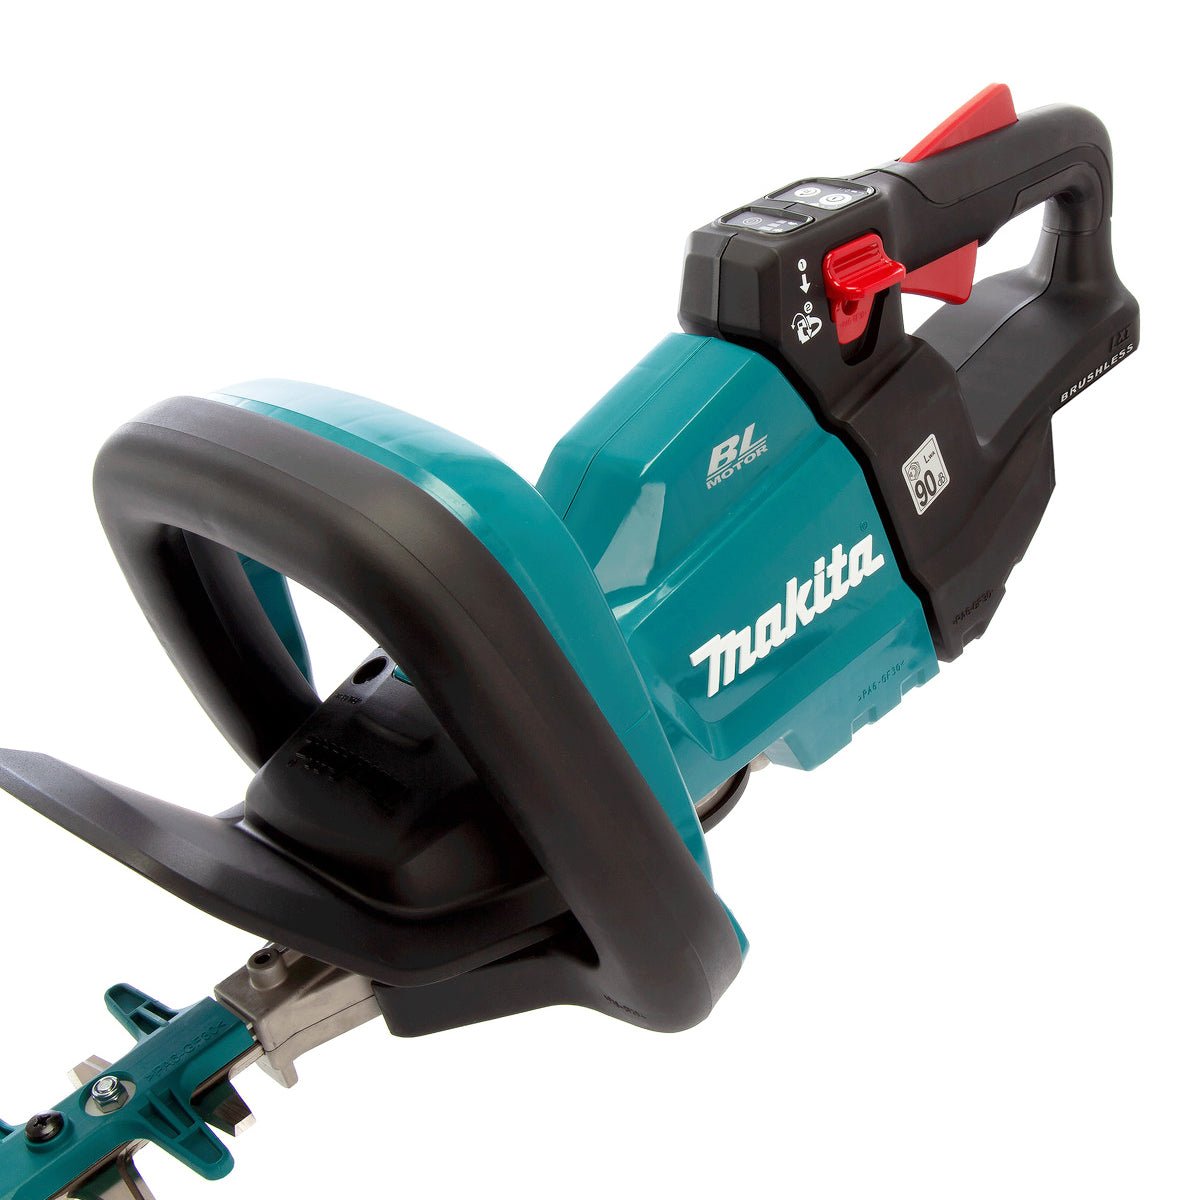 Makita DUH502RT 18V Brushless Hedge Trimmer 50cm With 1 x 5.0Ah Battery & Charger